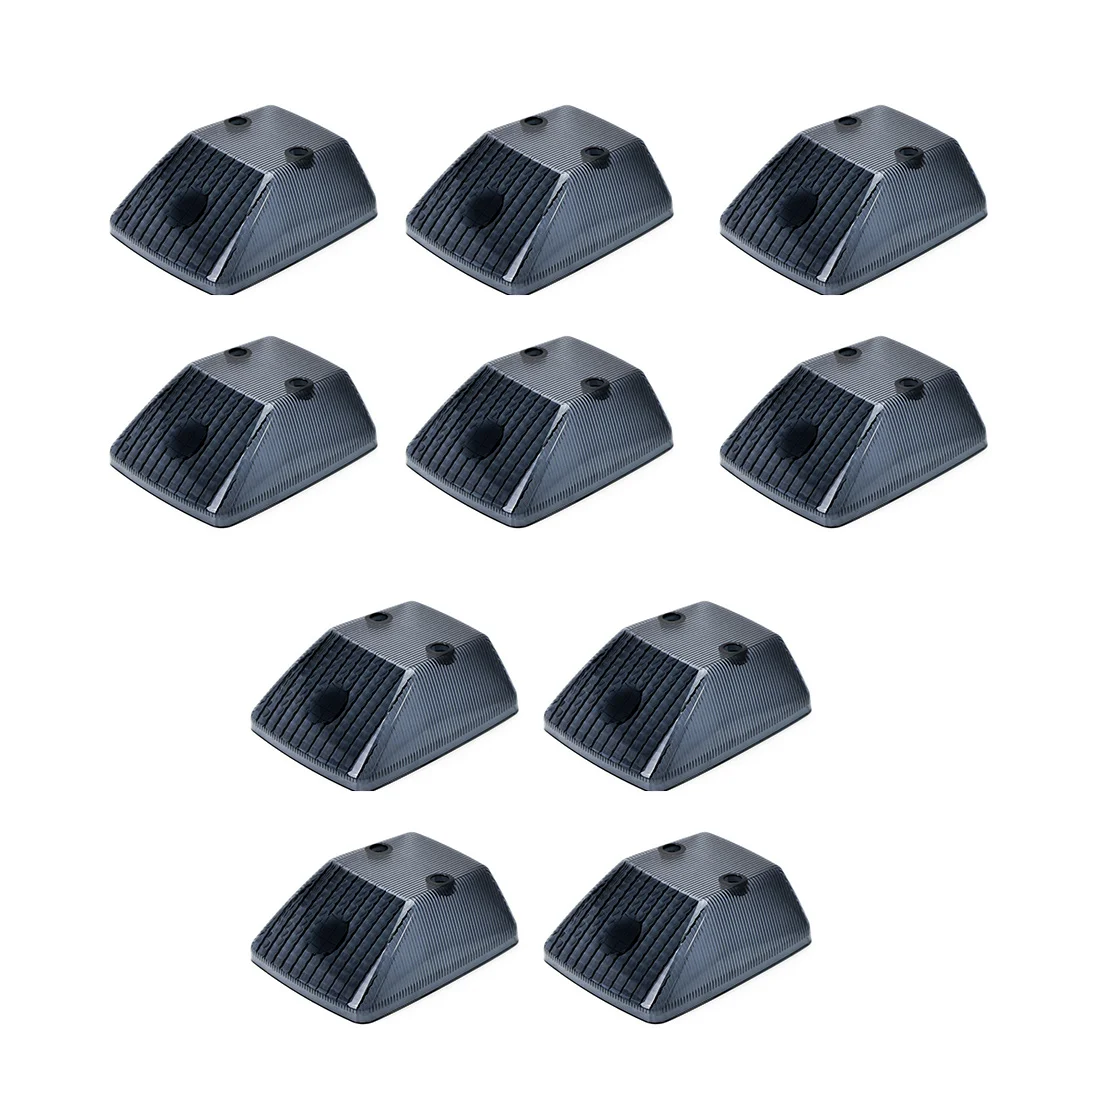 

10PCS Car Front Turn Signal Lamp Lenses Corner Lamp Cover A4638260057 for Mercedes Benz W463 G-Class G500 G550 1986-2018